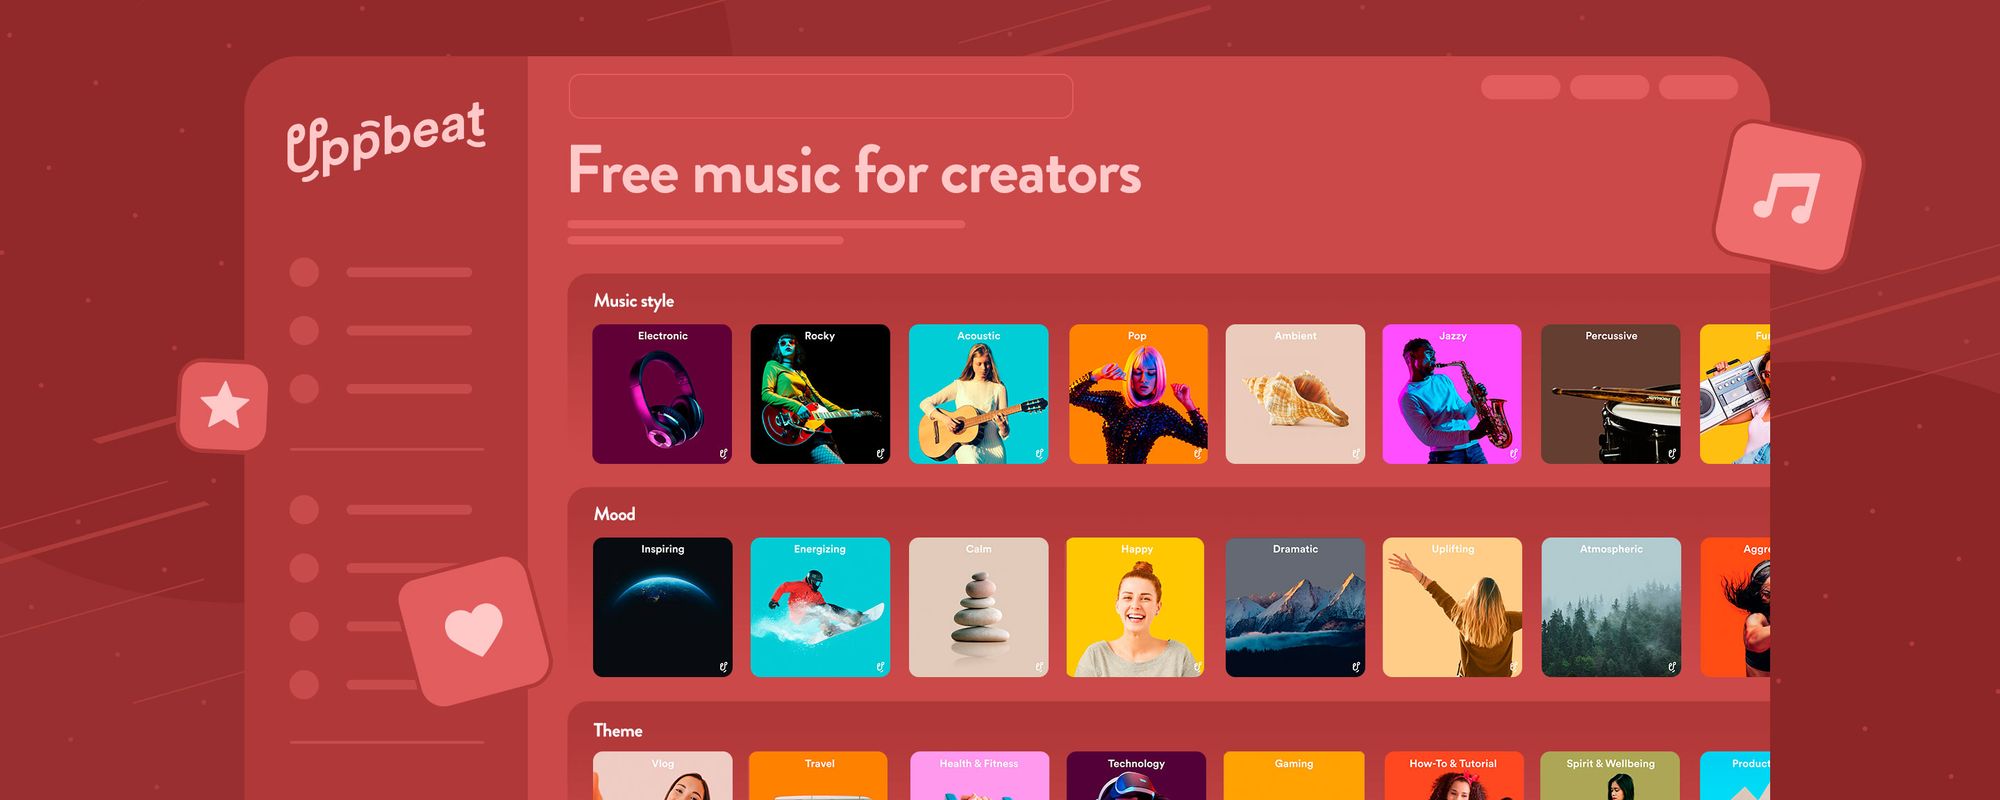 Illustration of the Uppbeat platform as an alternative to YouTube Creator Music.